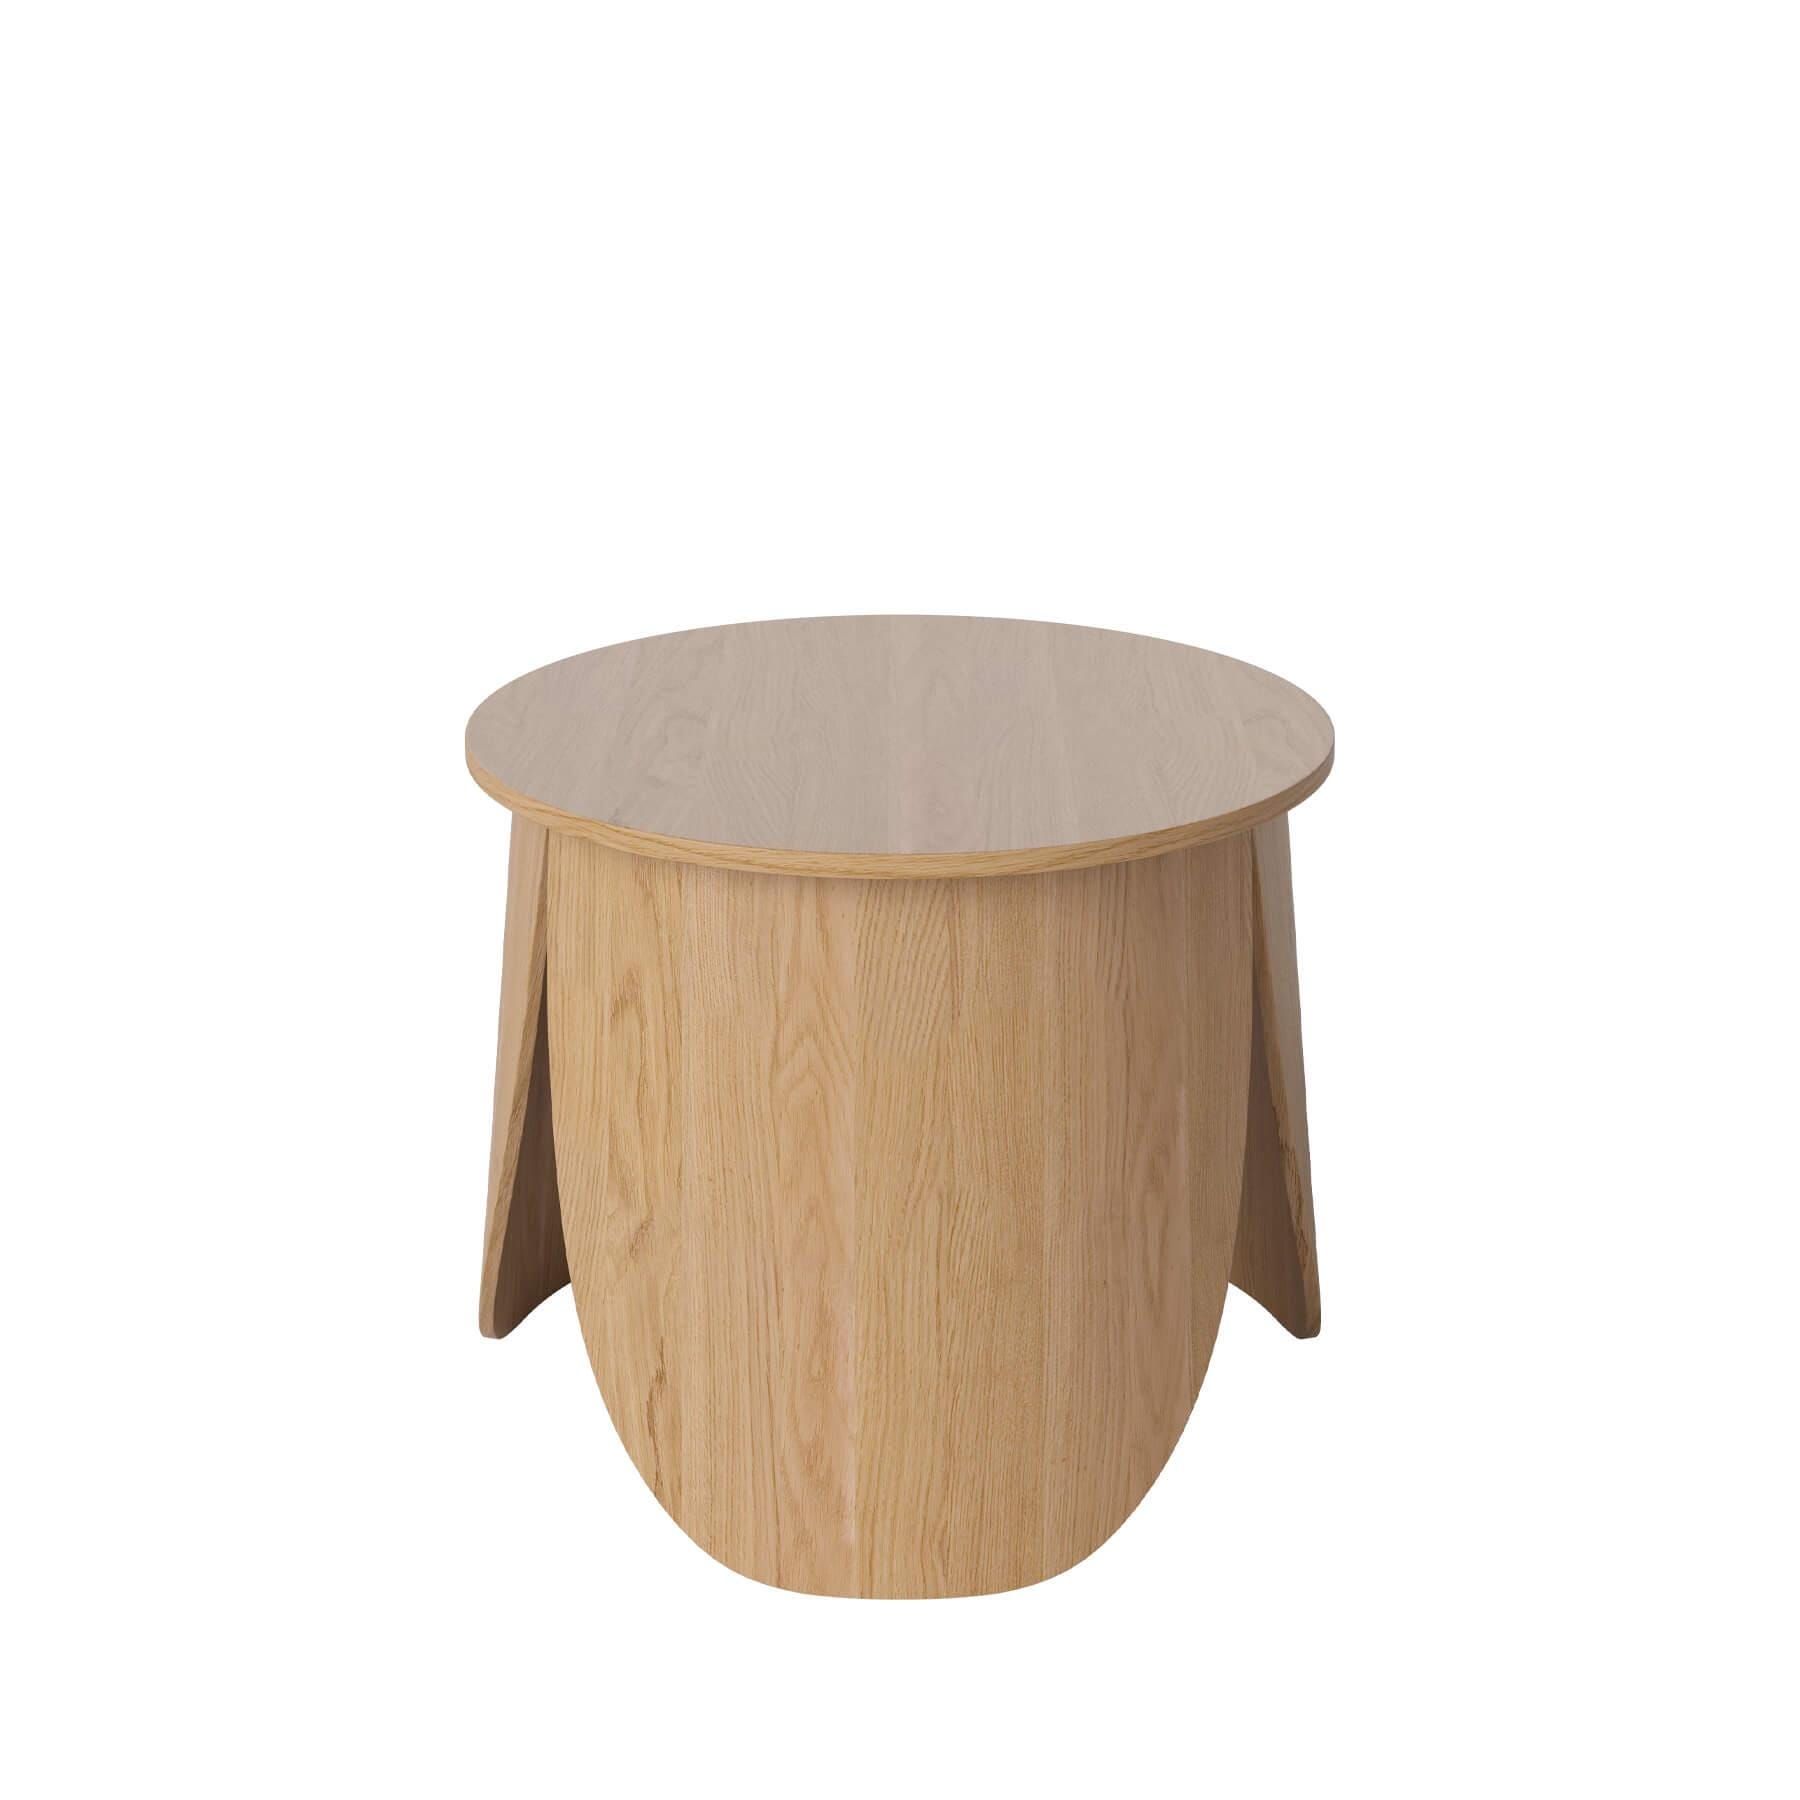 Bolia Peyote Coffee Table Small High Lacquered Oak Light Wood Designer Furniture From Holloways Of Ludlow